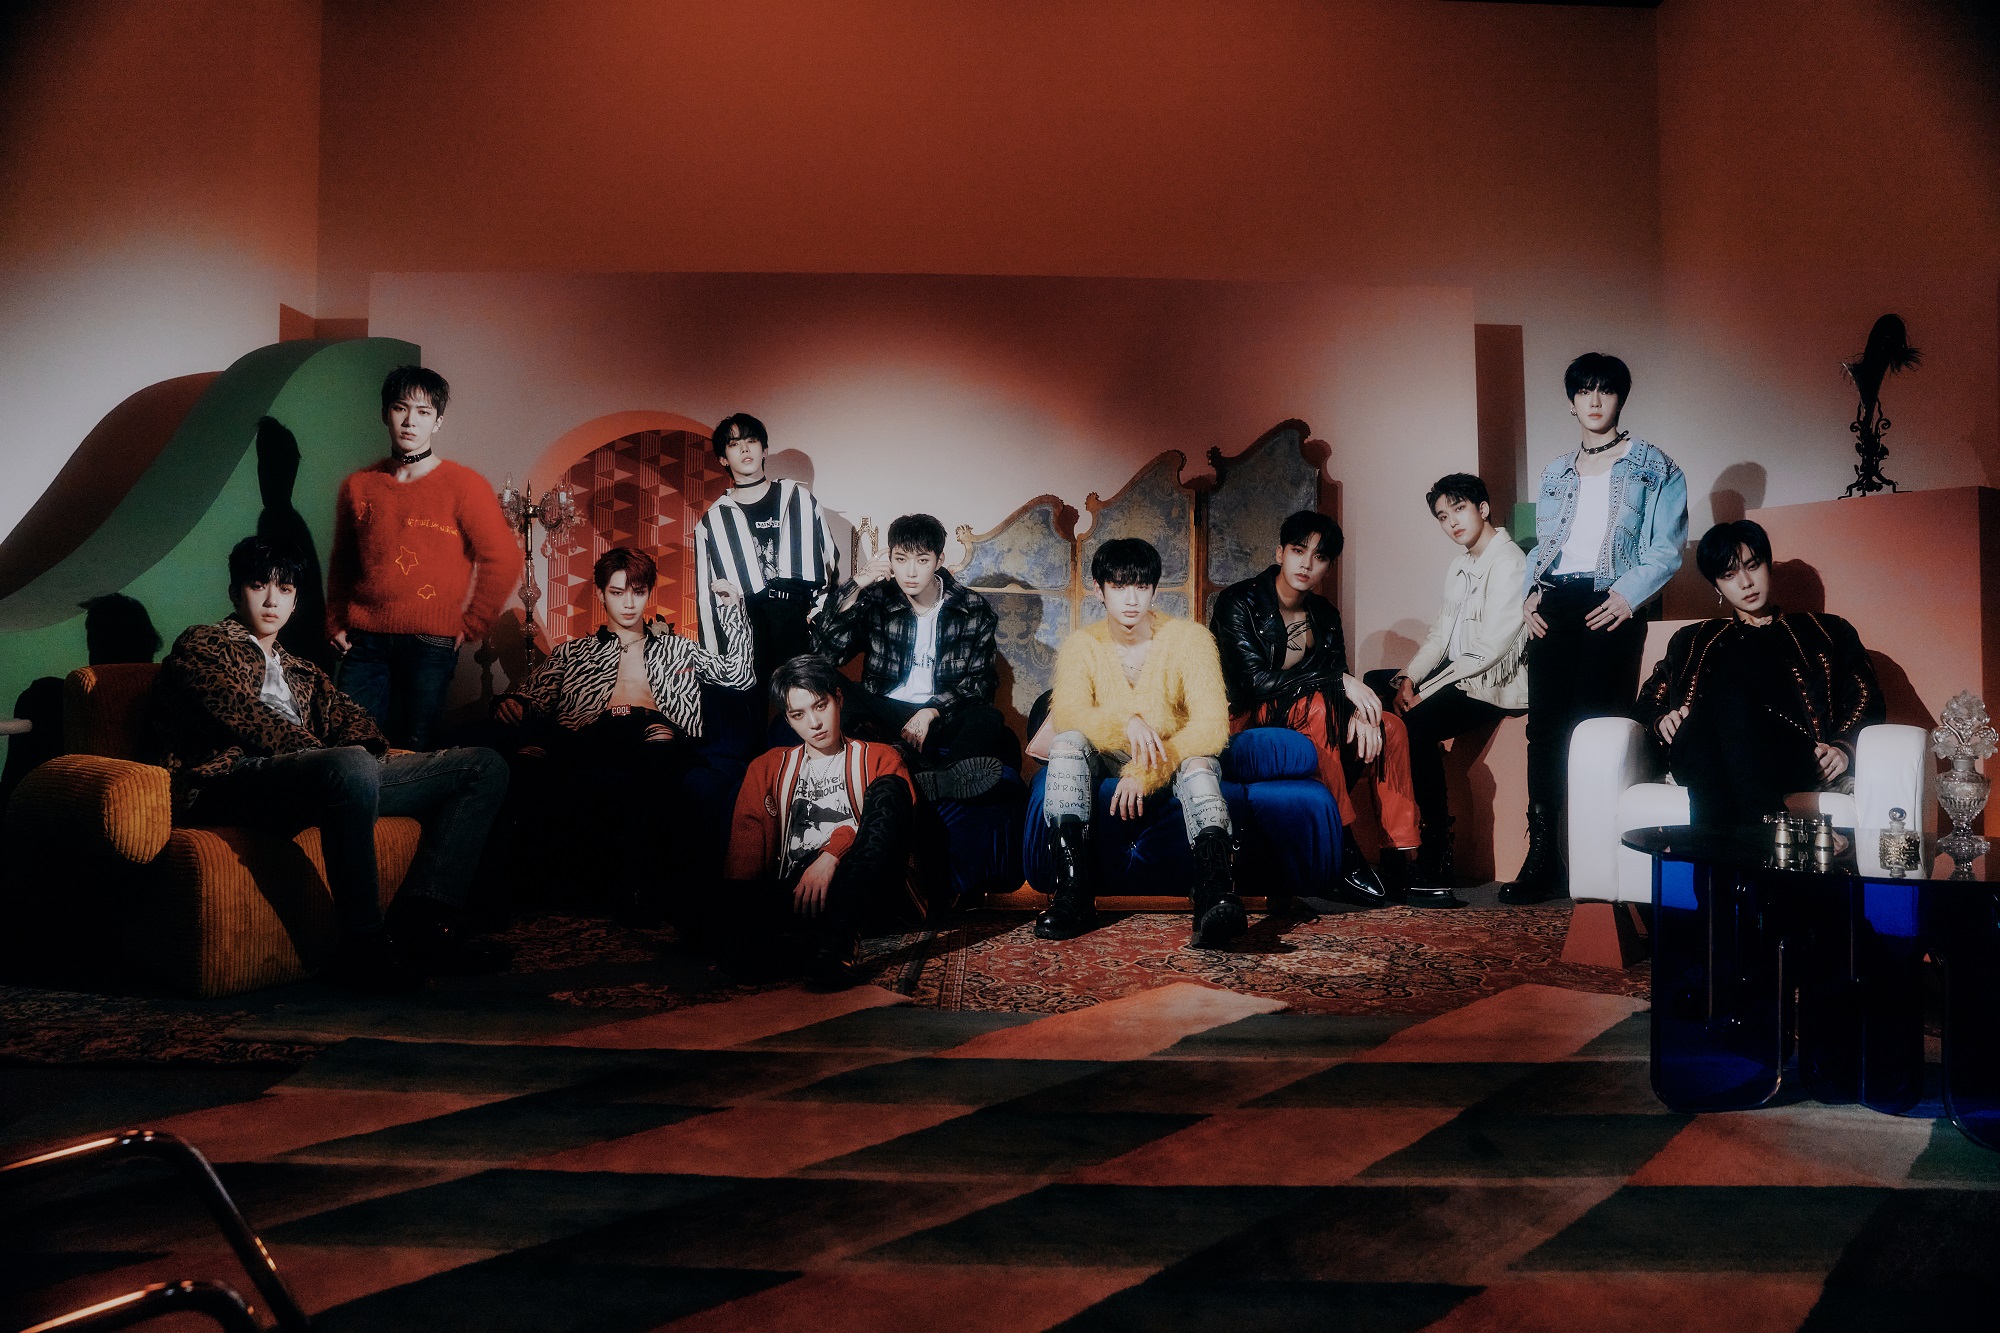 The members of Omega X pose sit in a dim room with red lighting